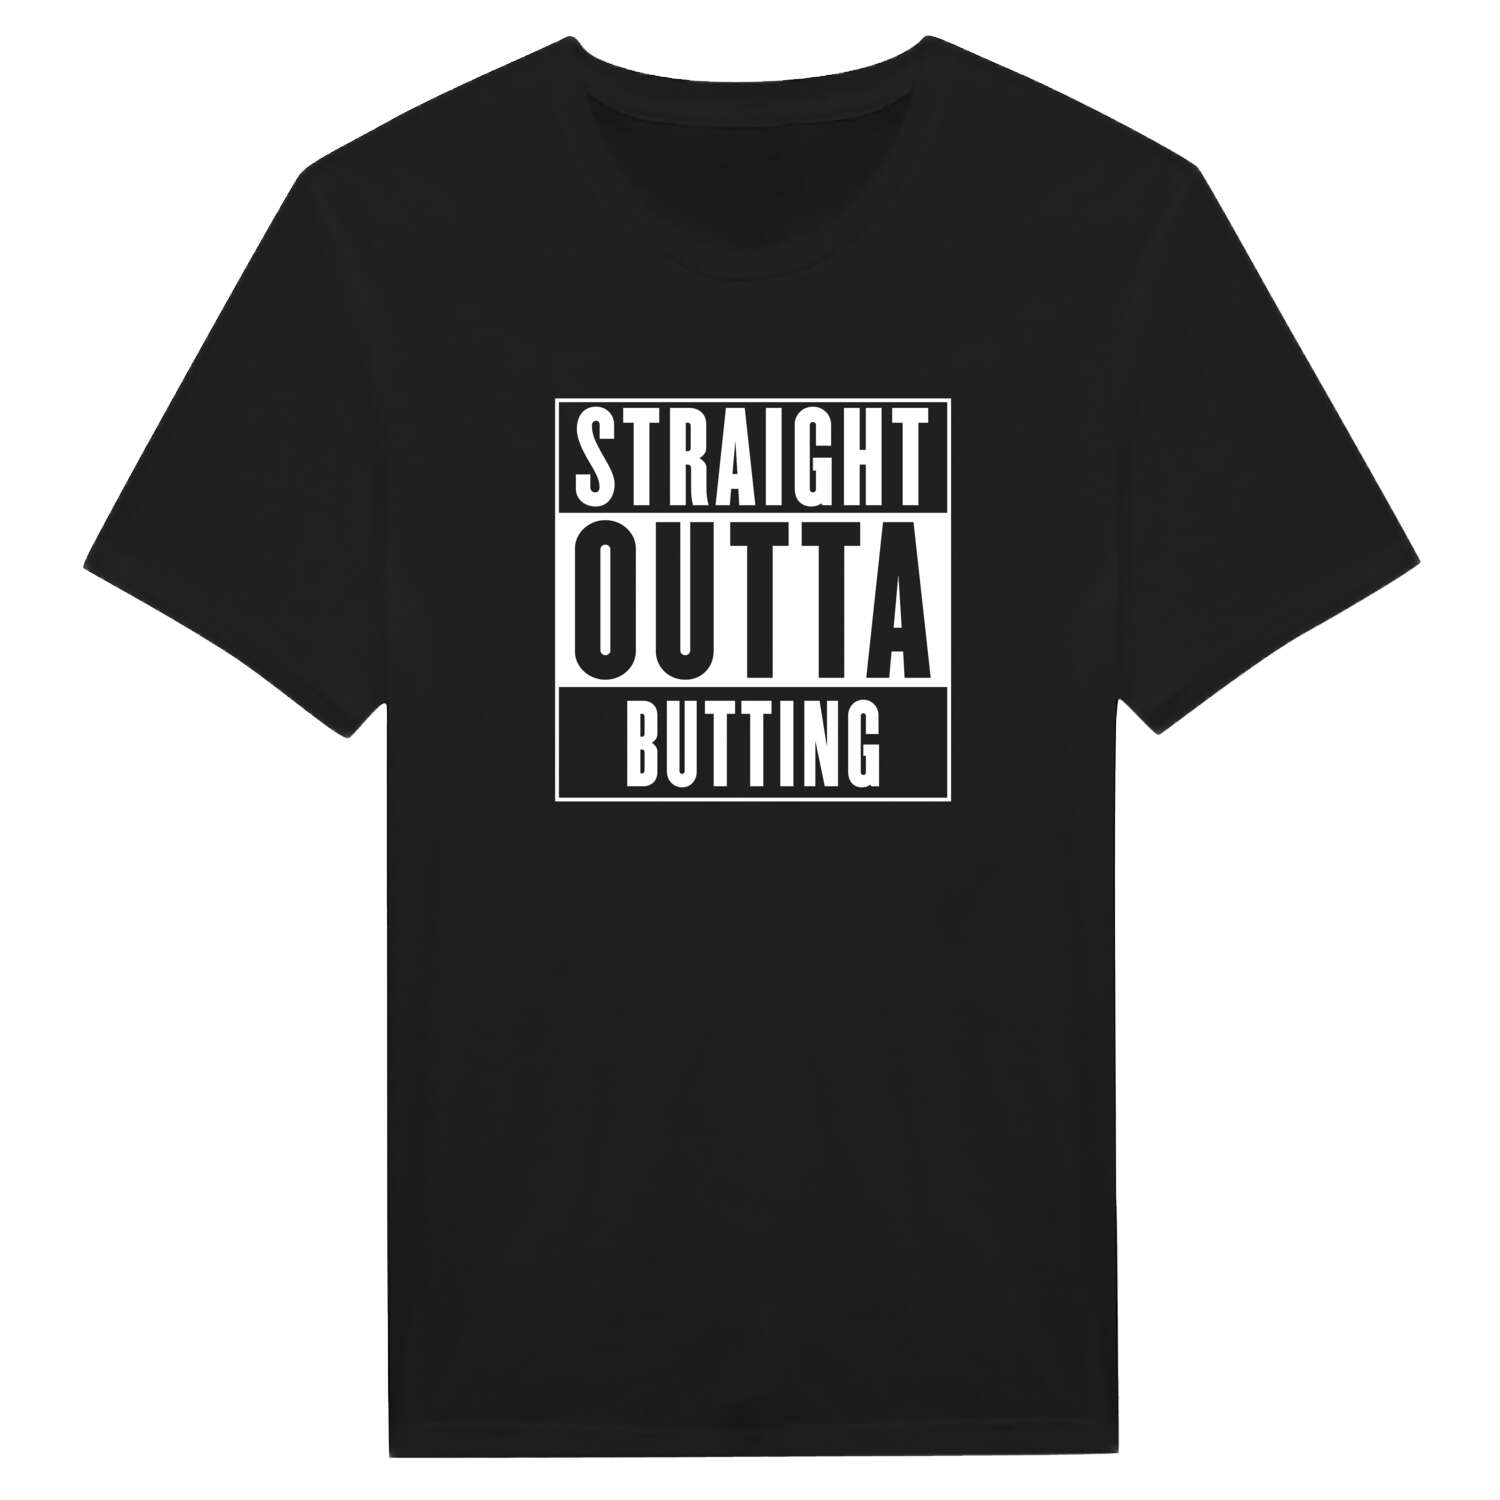 Butting T-Shirt »Straight Outta«